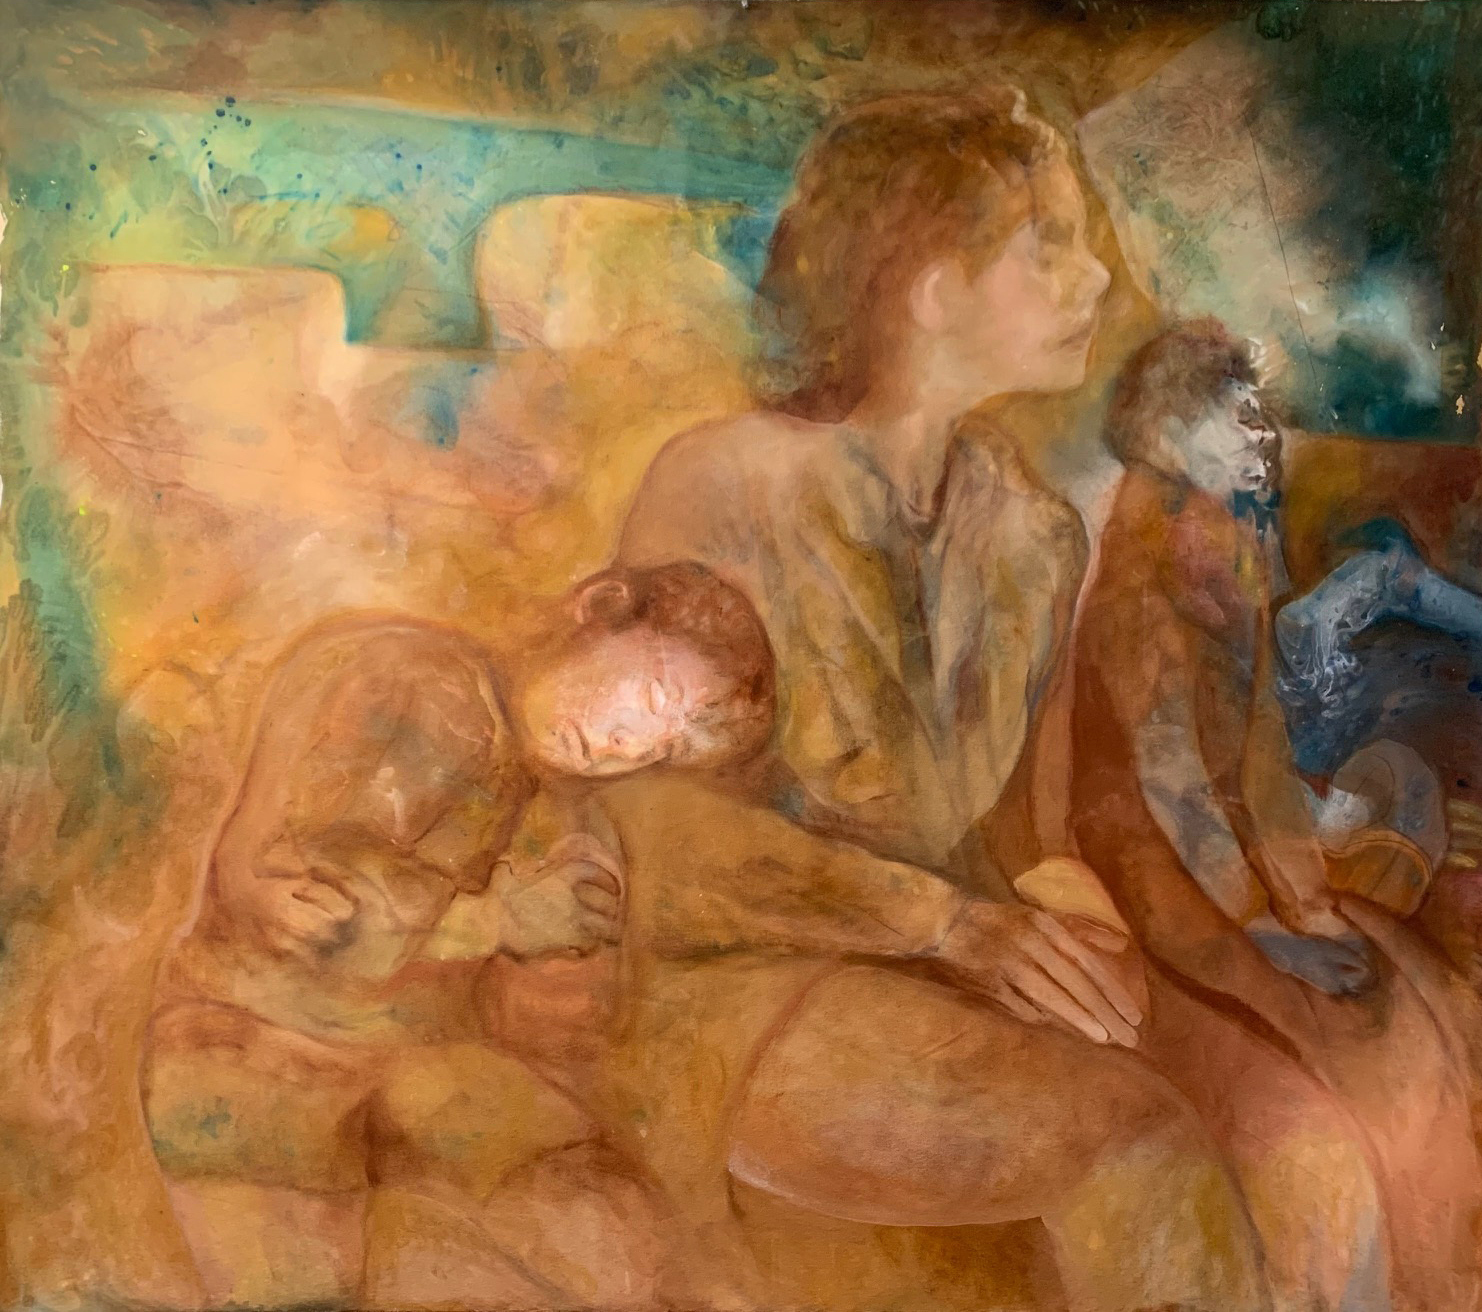 Maya Bloch, "Back of the car", 2023, acrylic and oil on canvas, 160x183cm, courtesy of the artist